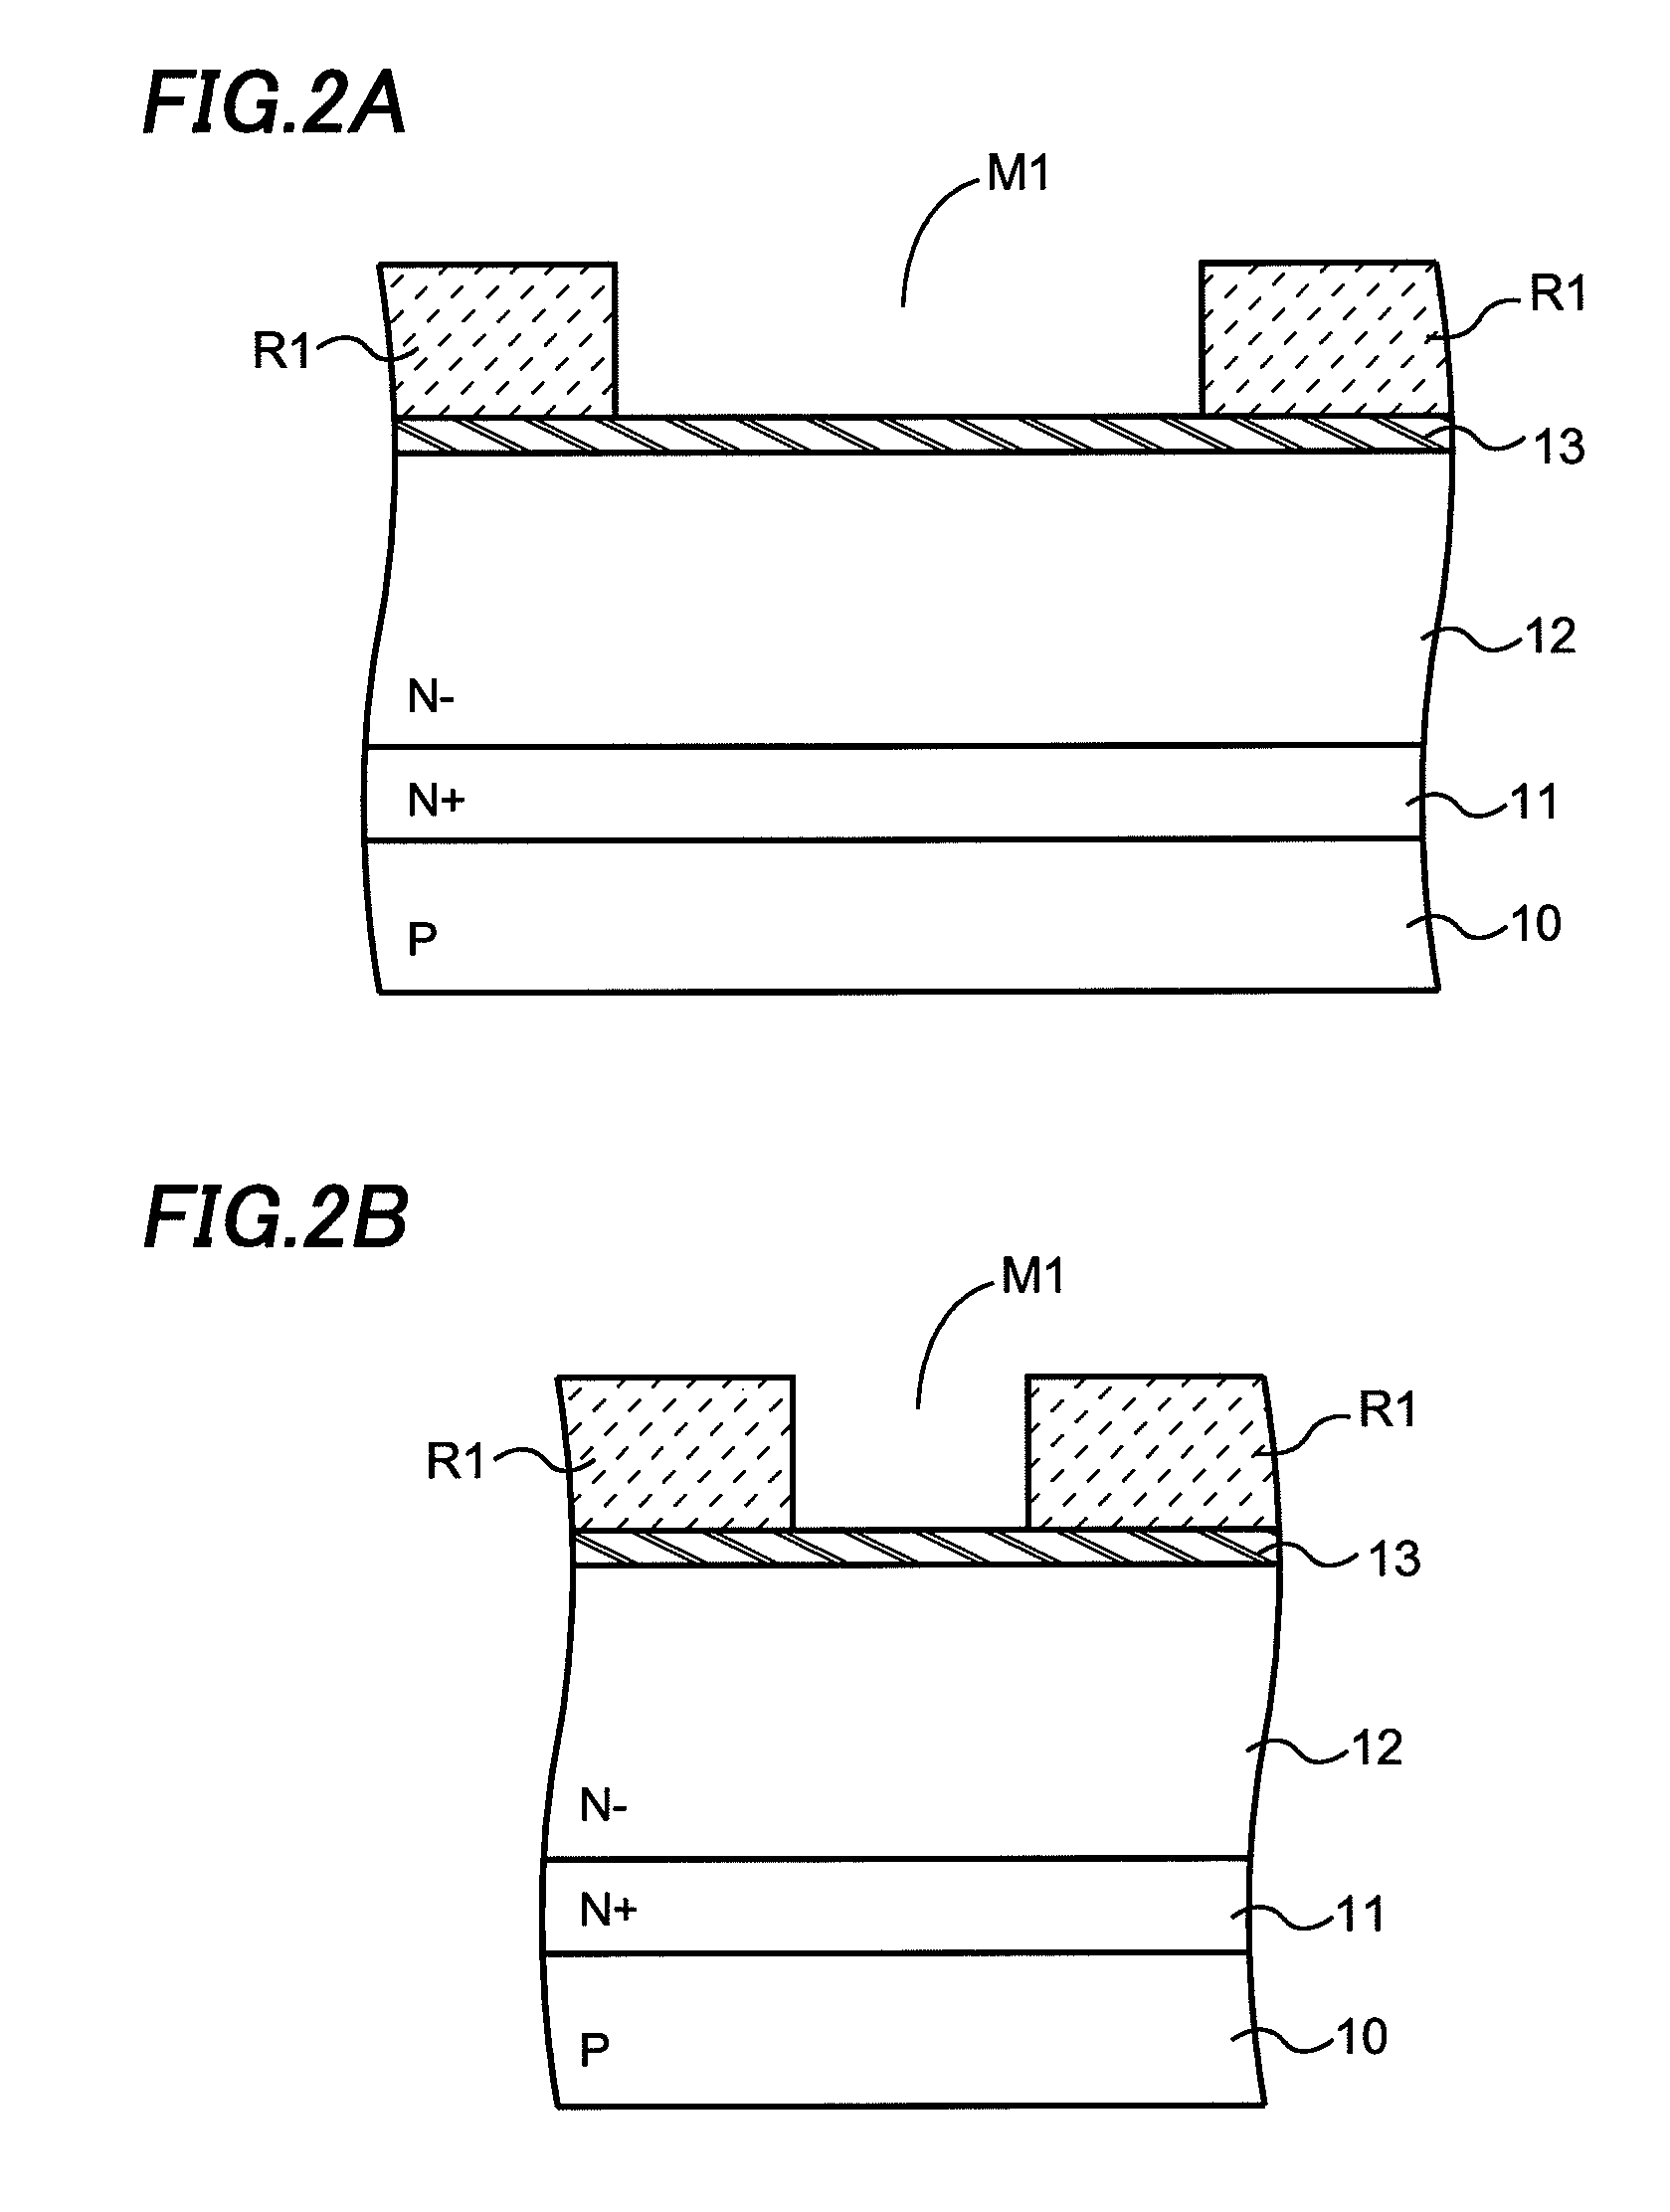 Trench gate type transistor